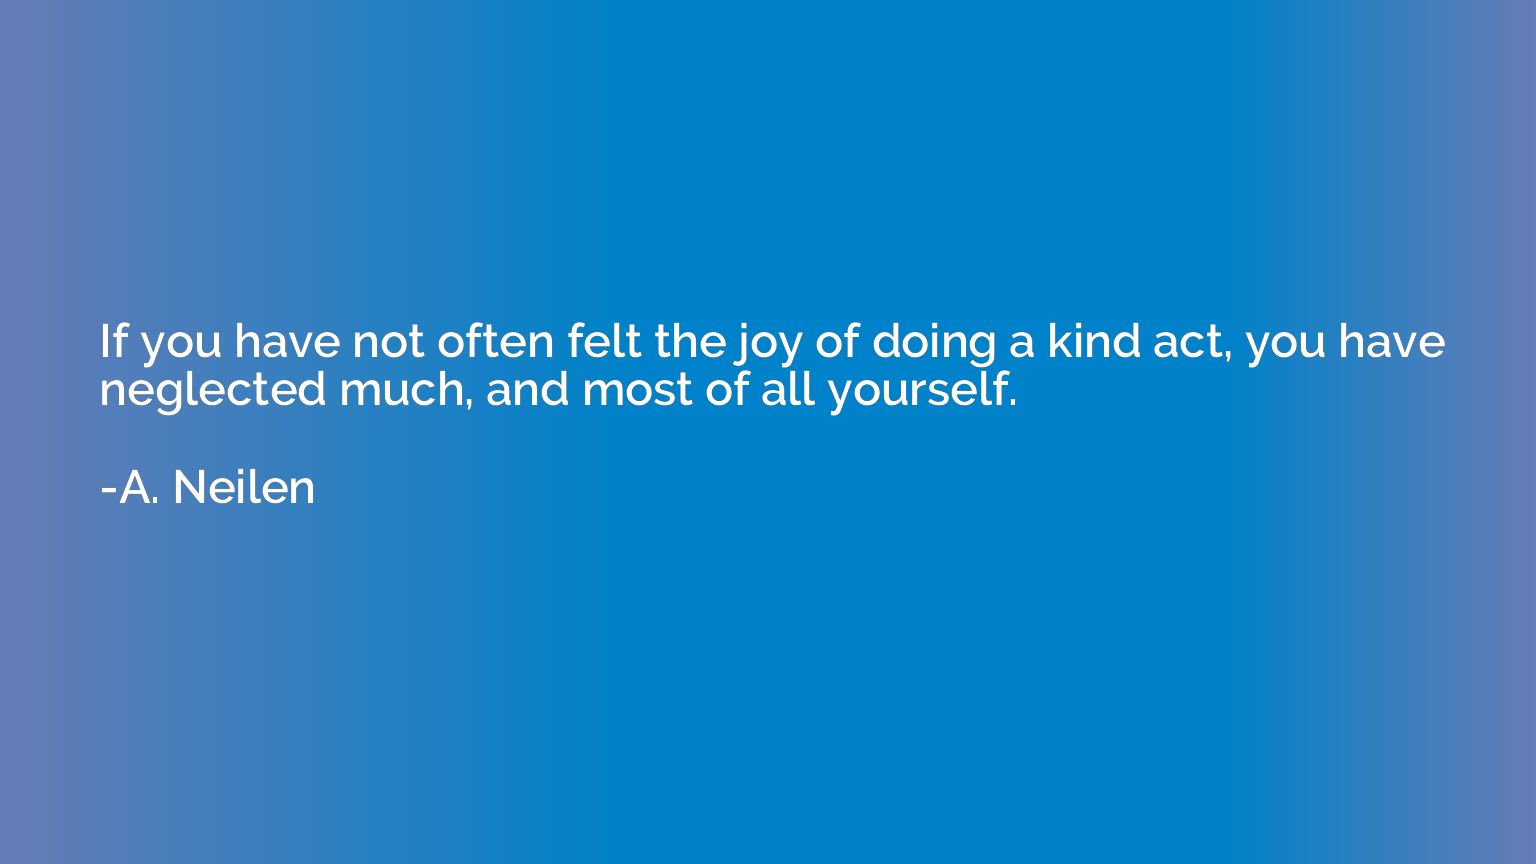 If you have not often felt the joy of doing a kind act, you 